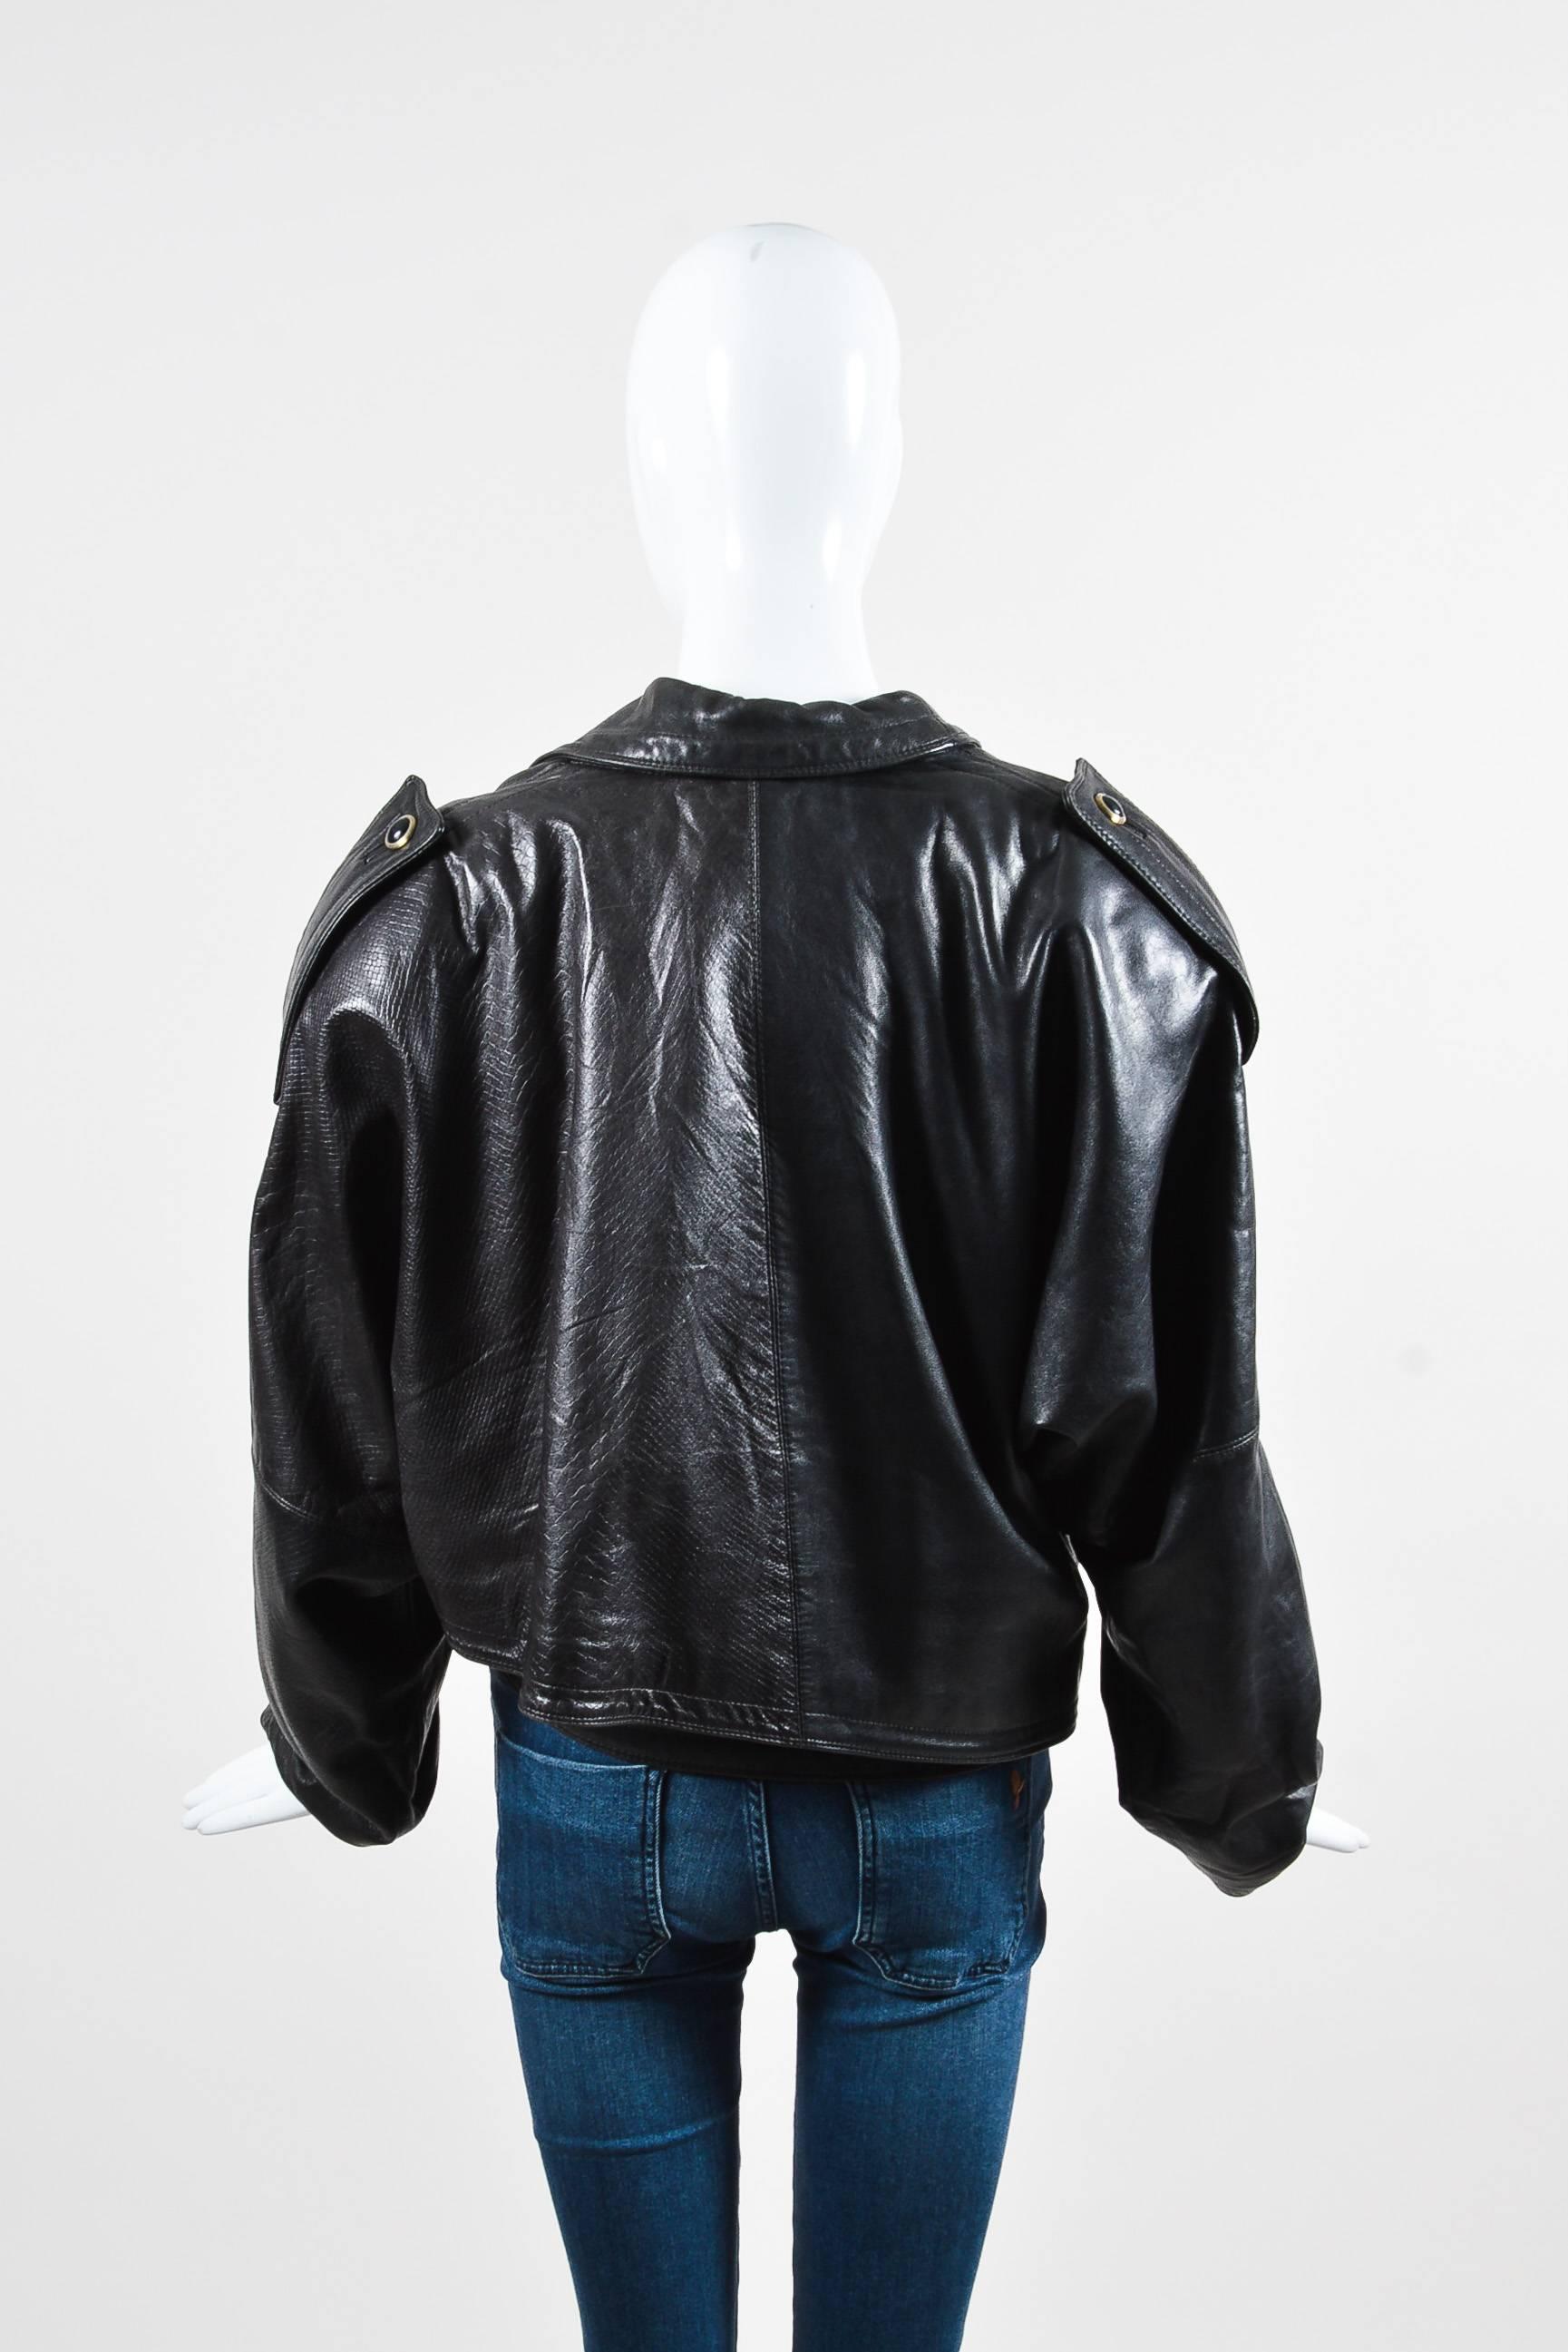 Vintage jacket featuring a cropped silhouette, structured shoulders, an asymmetrical lapel, buttoned tabs at the shoulders, a buttoned gun flap, and a single button-flap front pocket. Buckled strap at the waist. Embossed left side finishes off the